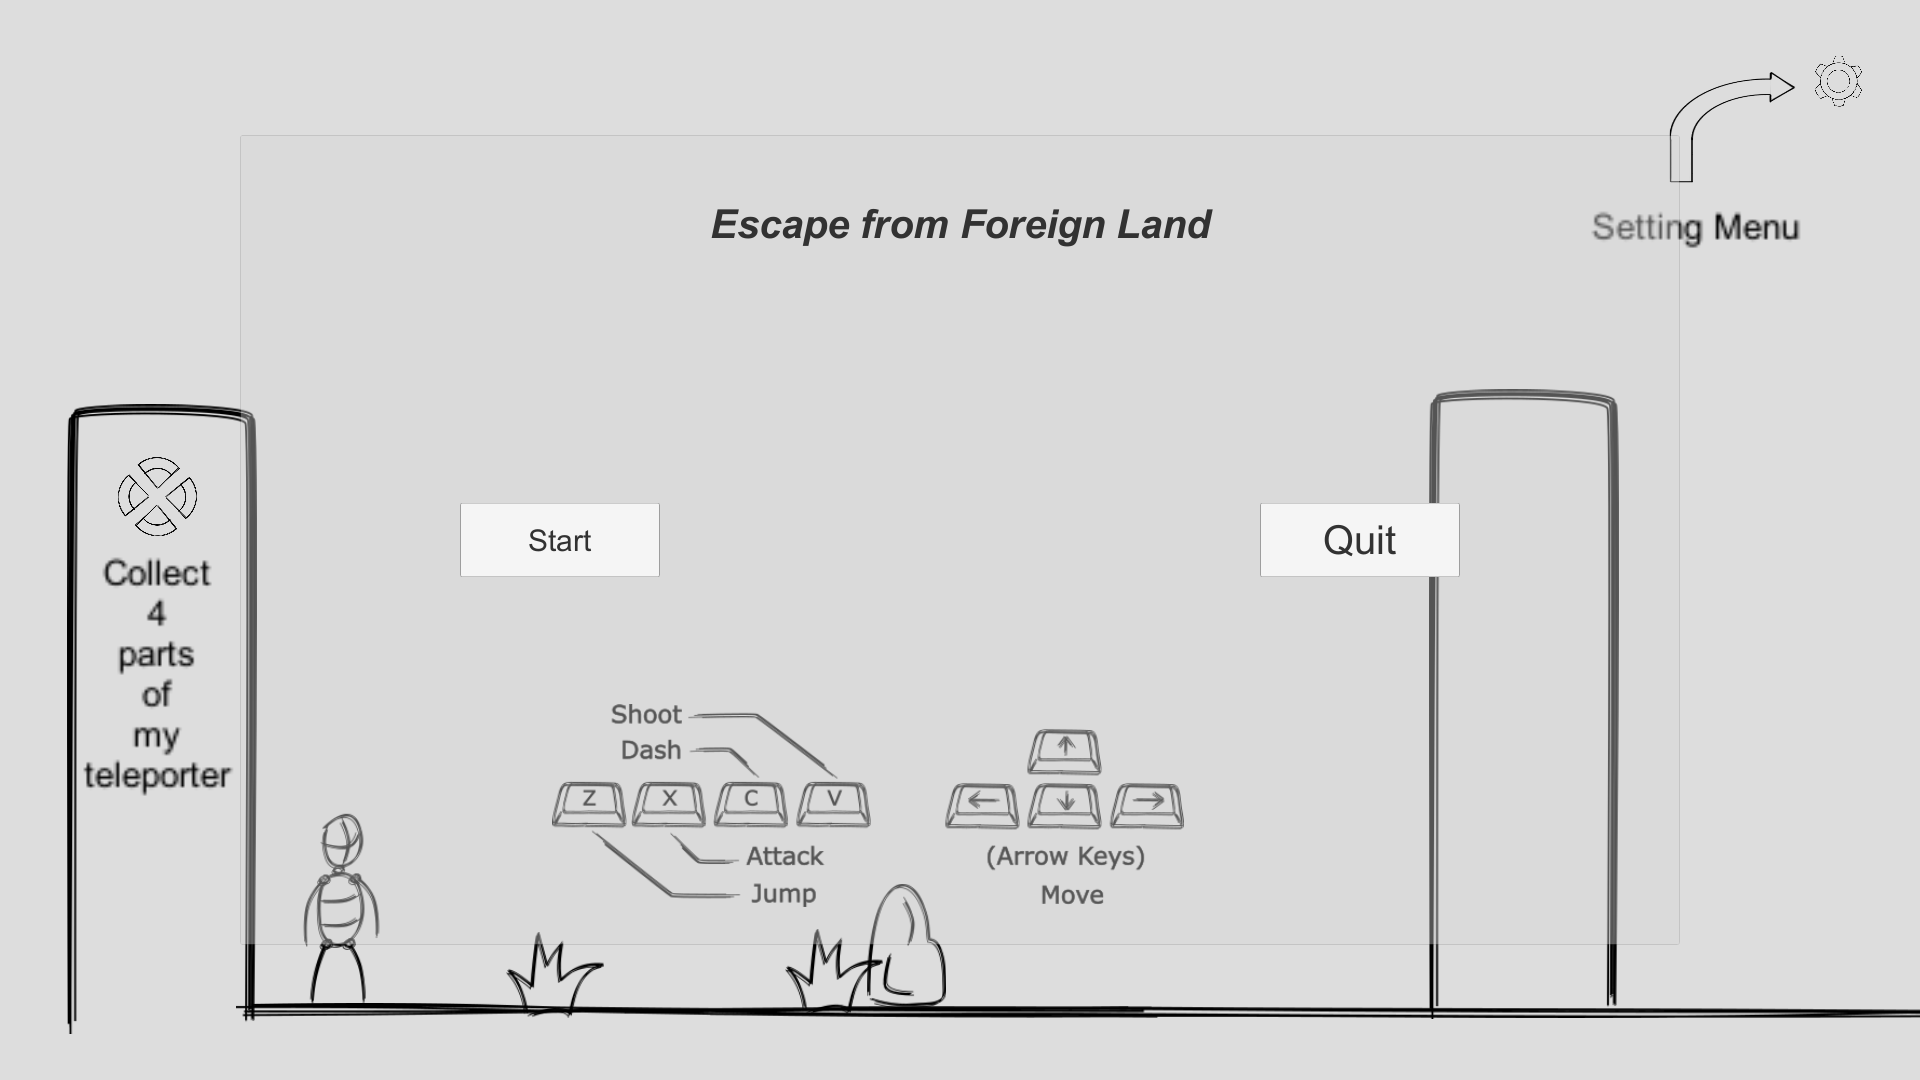 Escape from Foreign Land (Best Innovation Award 2022 Team 8)